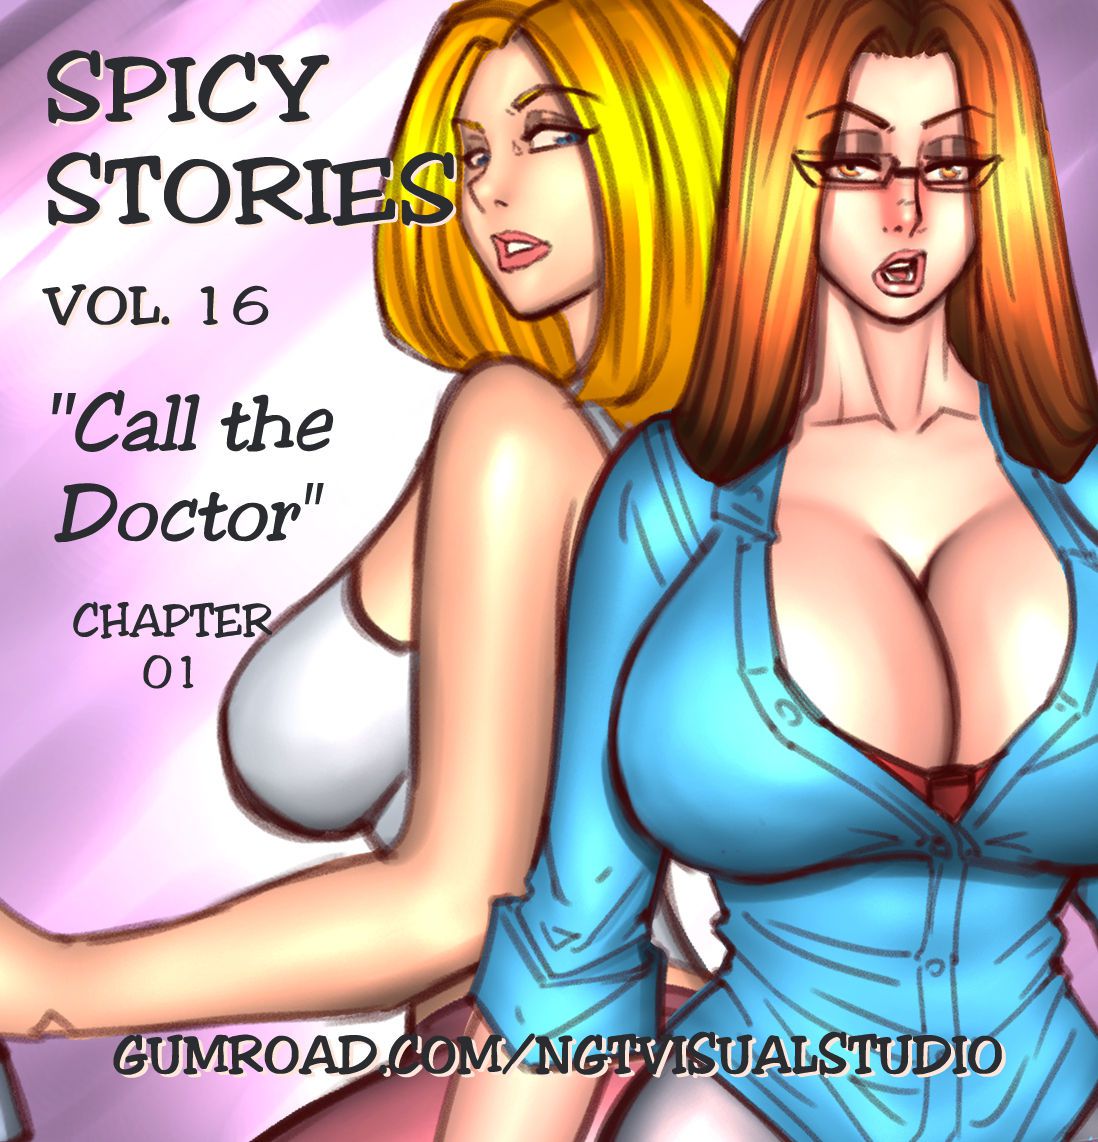 NGT Spicy Stories 16 - Call the Doctor (Ongoing) NGT Spicy Stories 16 - Call the Doctor (Ongoing) 9